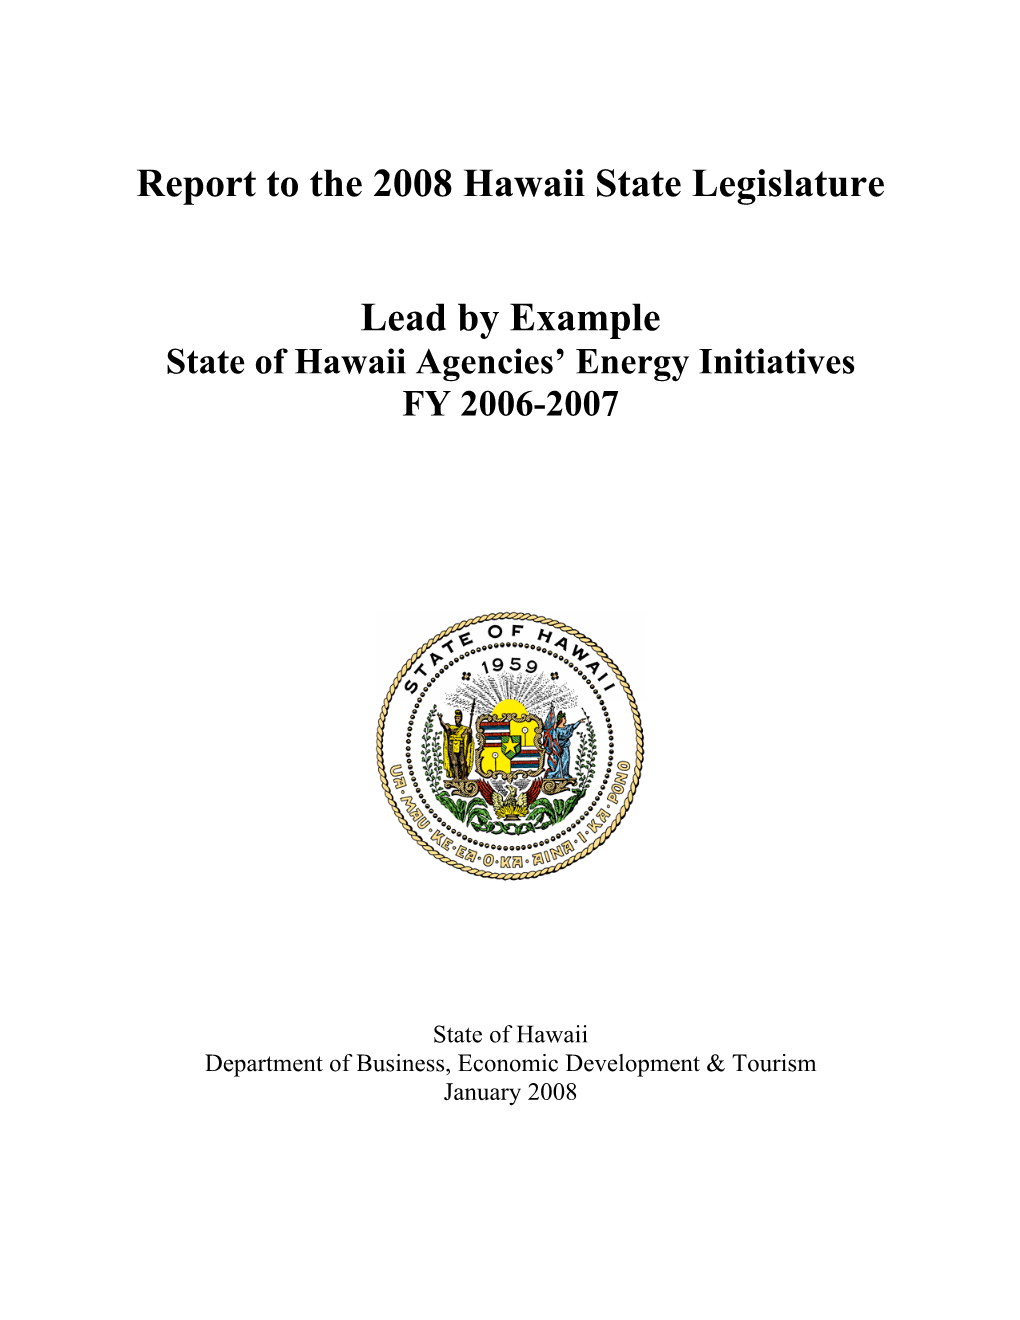 Lead by Example Report Fy 2007